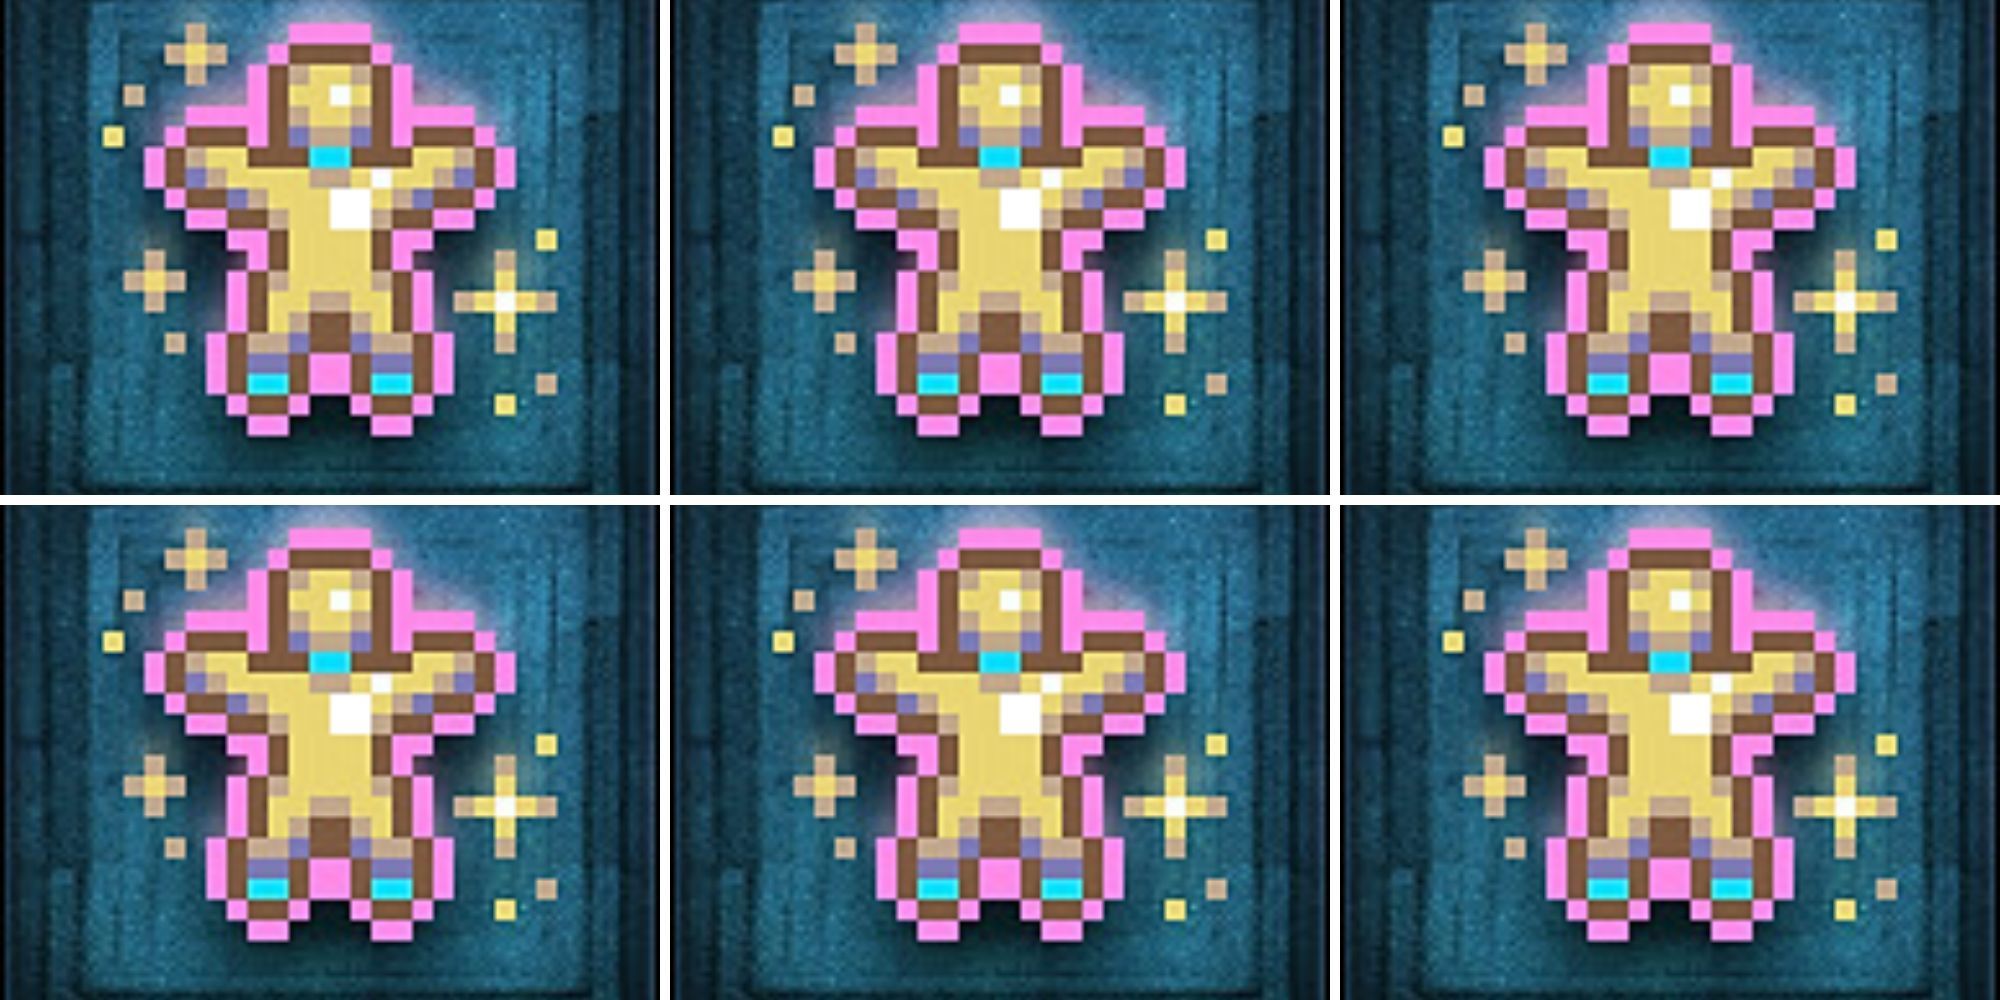 Repeating yellow and pink Introspection achievement pattern.